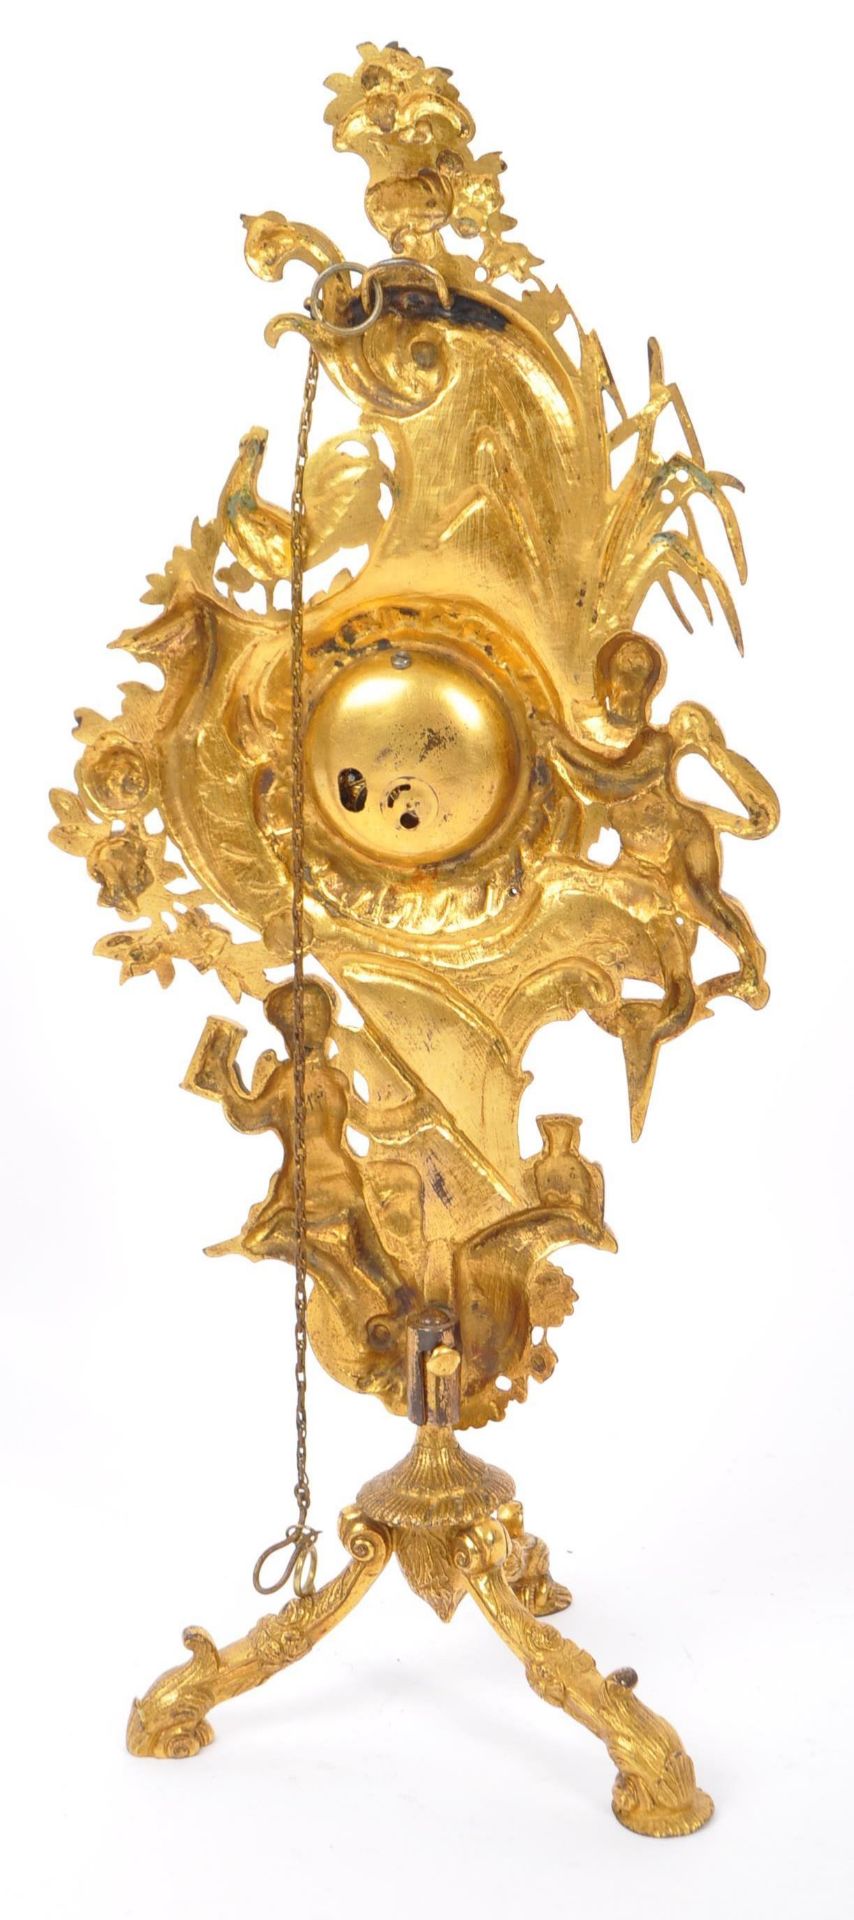 19TH CENTURY FRENCH BELLE EPOQUE ERA GILT CARTEL CLOCK ON STAND - Image 4 of 4